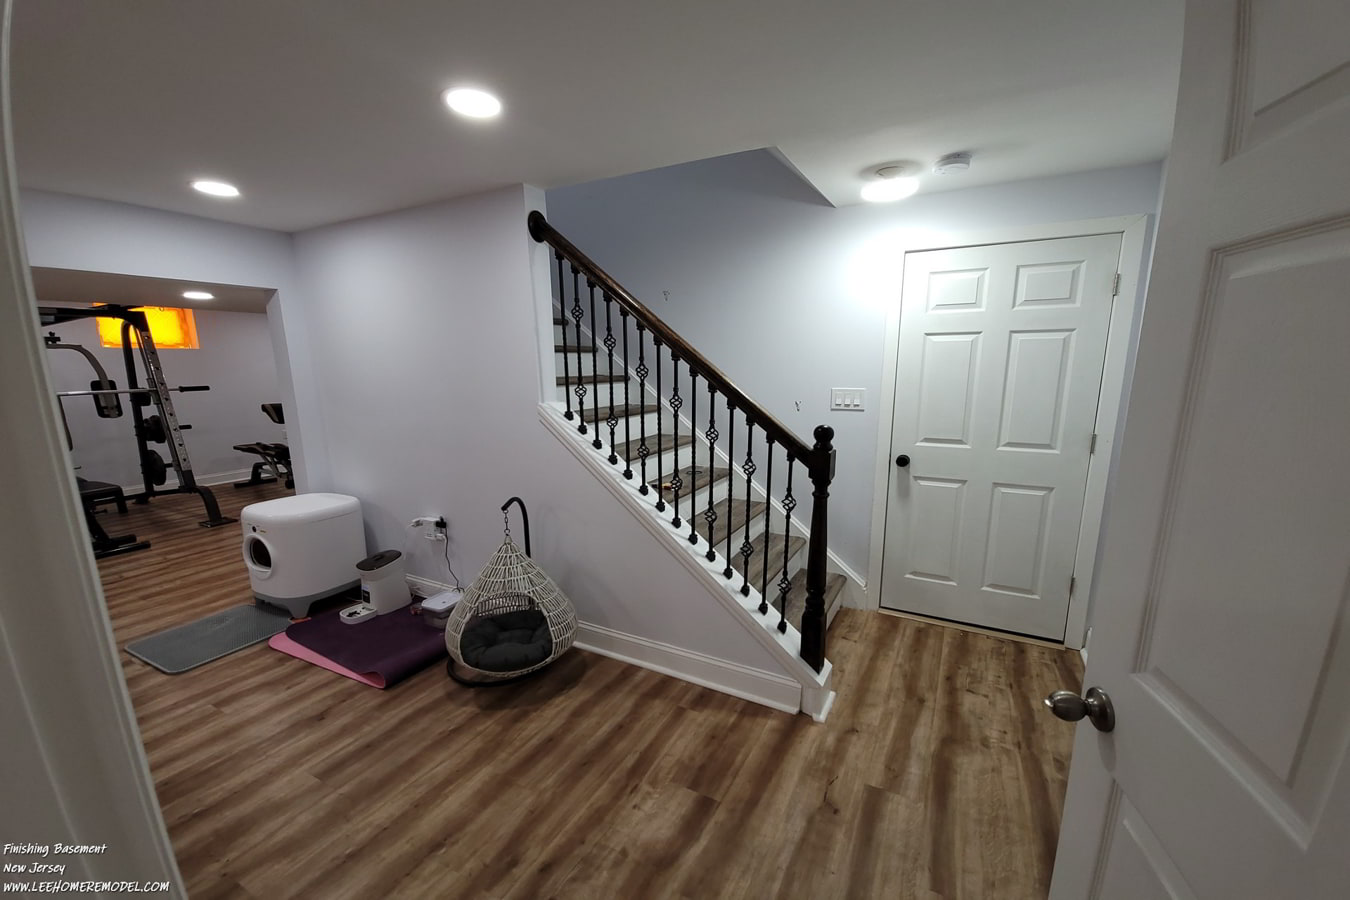 18-basement-remodeling-contractor-lawrence-new-jersey-1350x900.jpeg